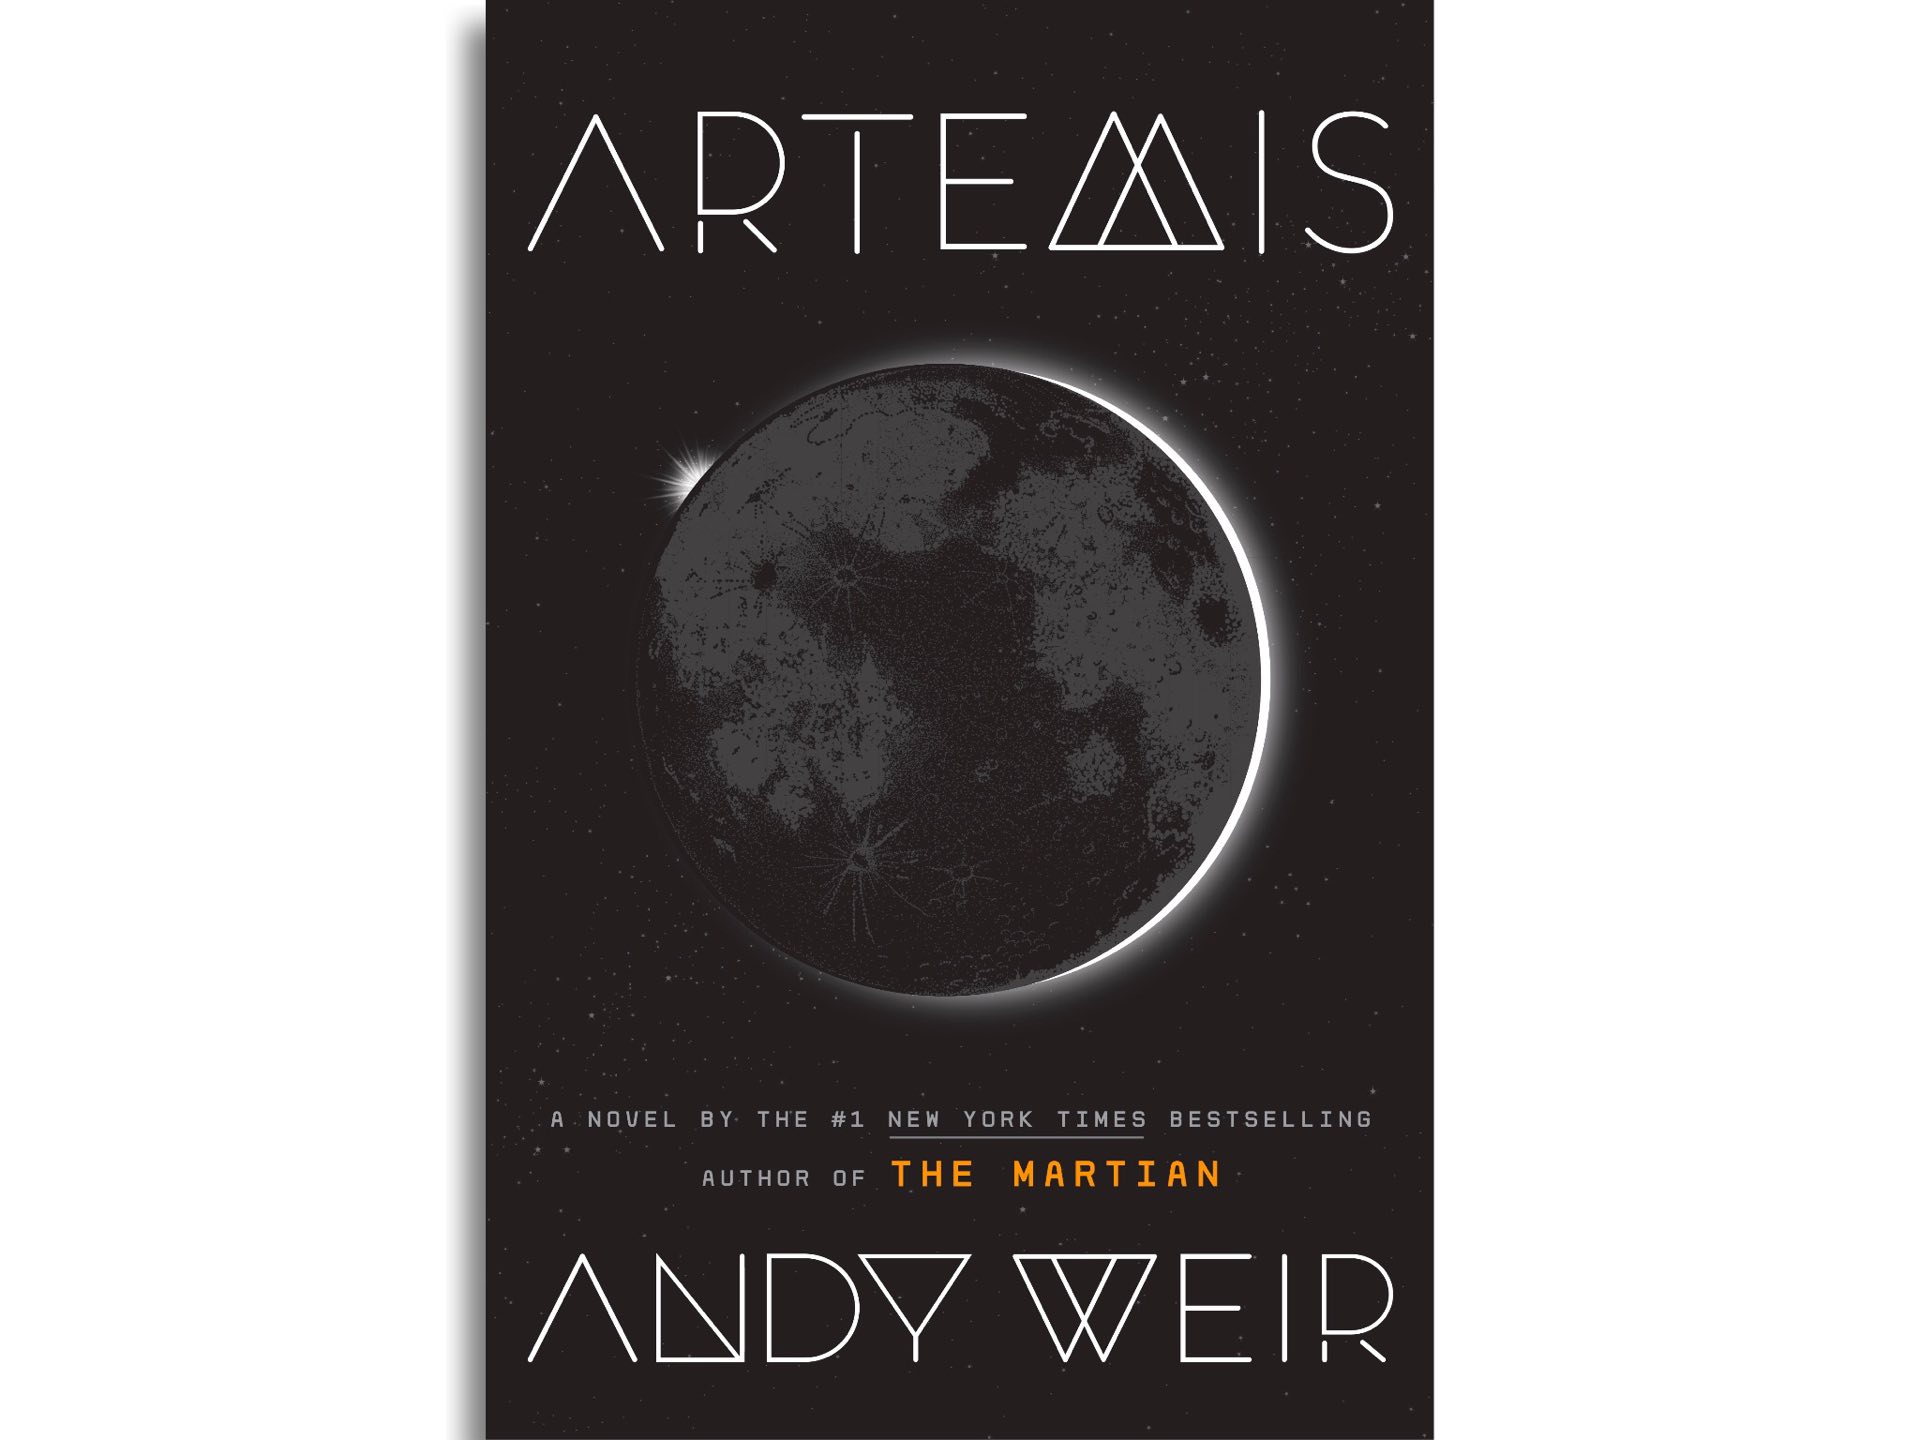 Andy weir